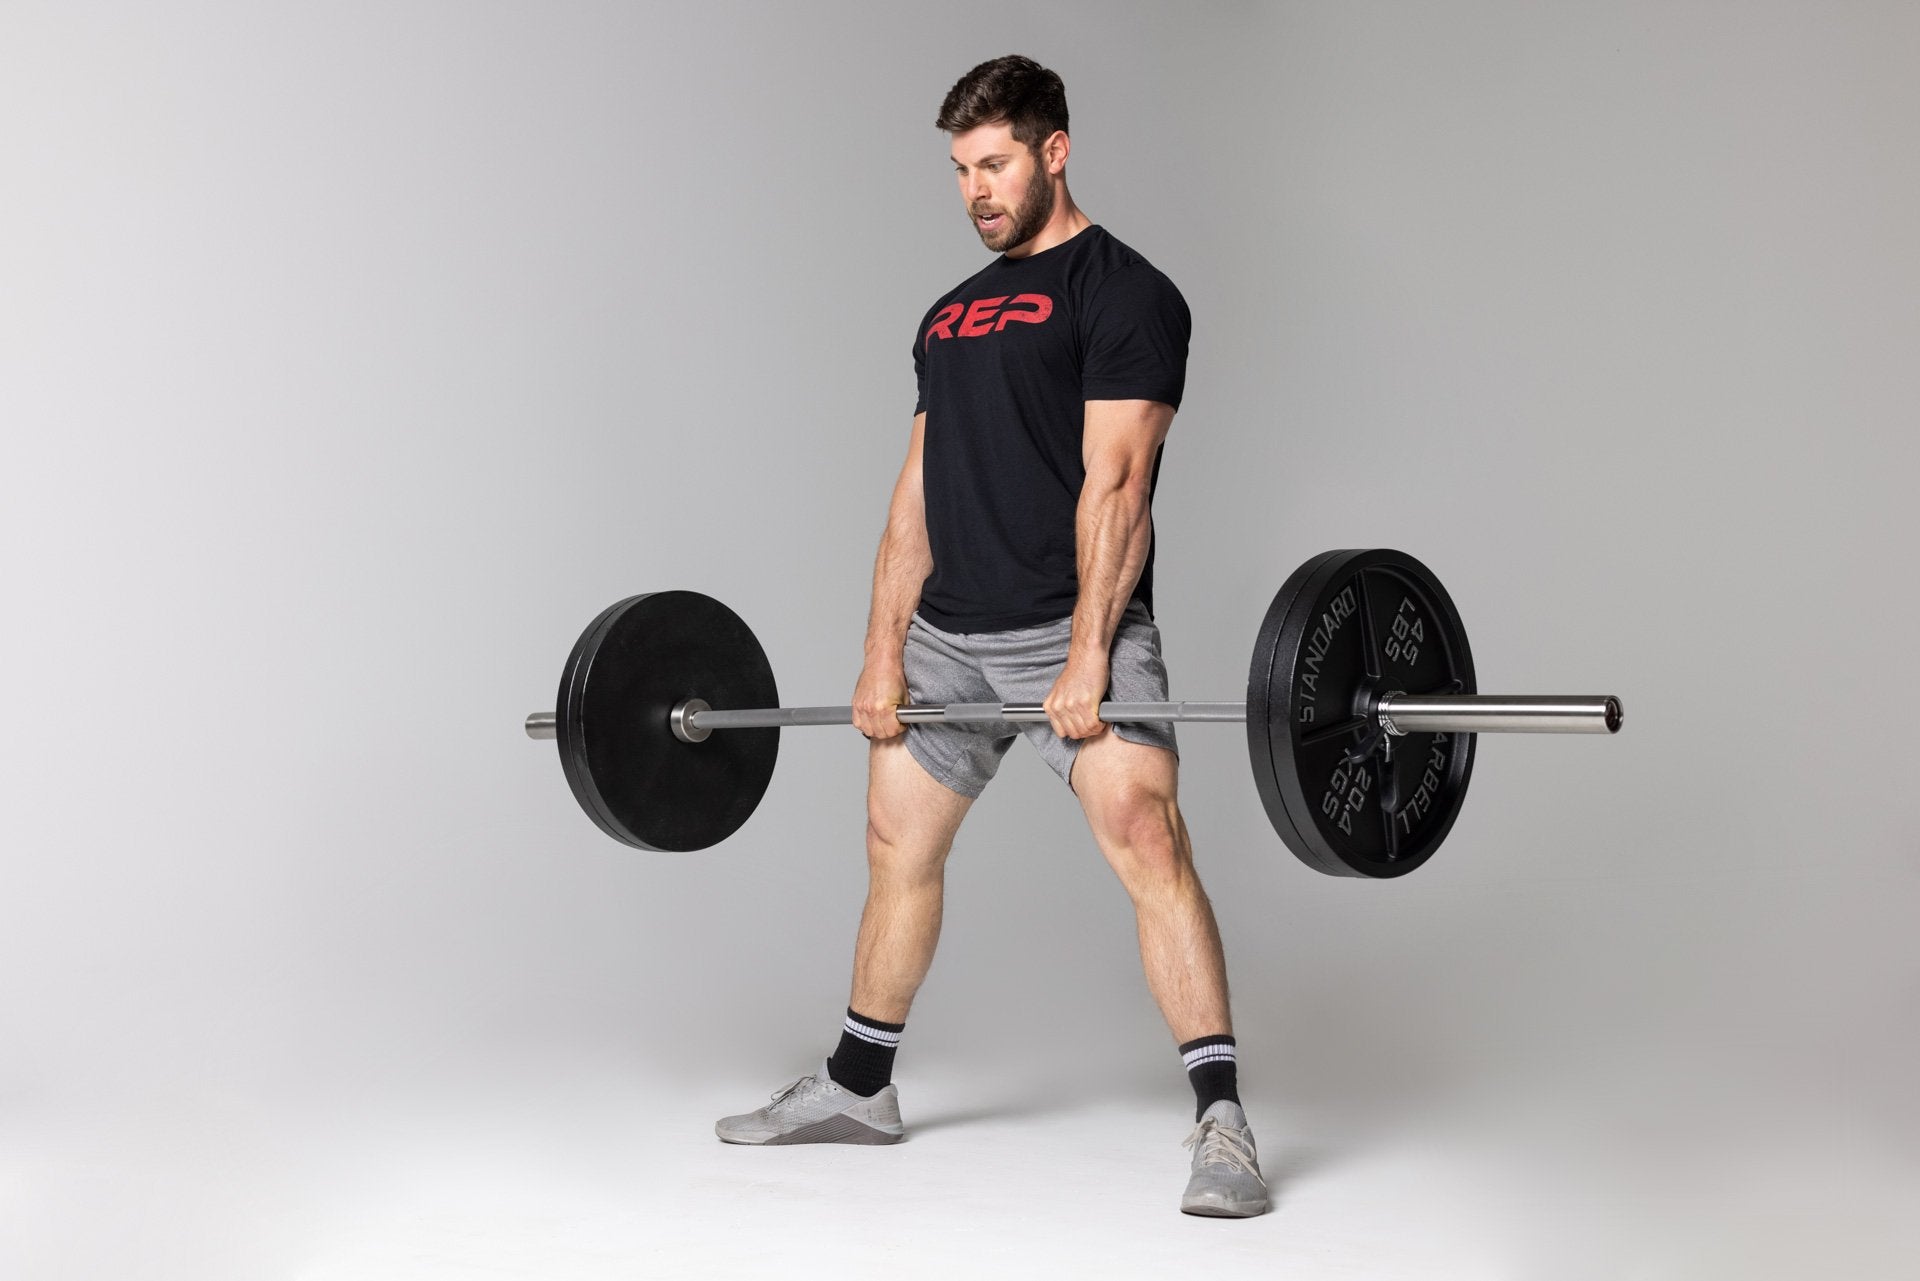 Lifter at the top position of a sumo-stance deadlift using a barbell loaded with two pairs of 45lb Old School Iron Plates and spring clips.